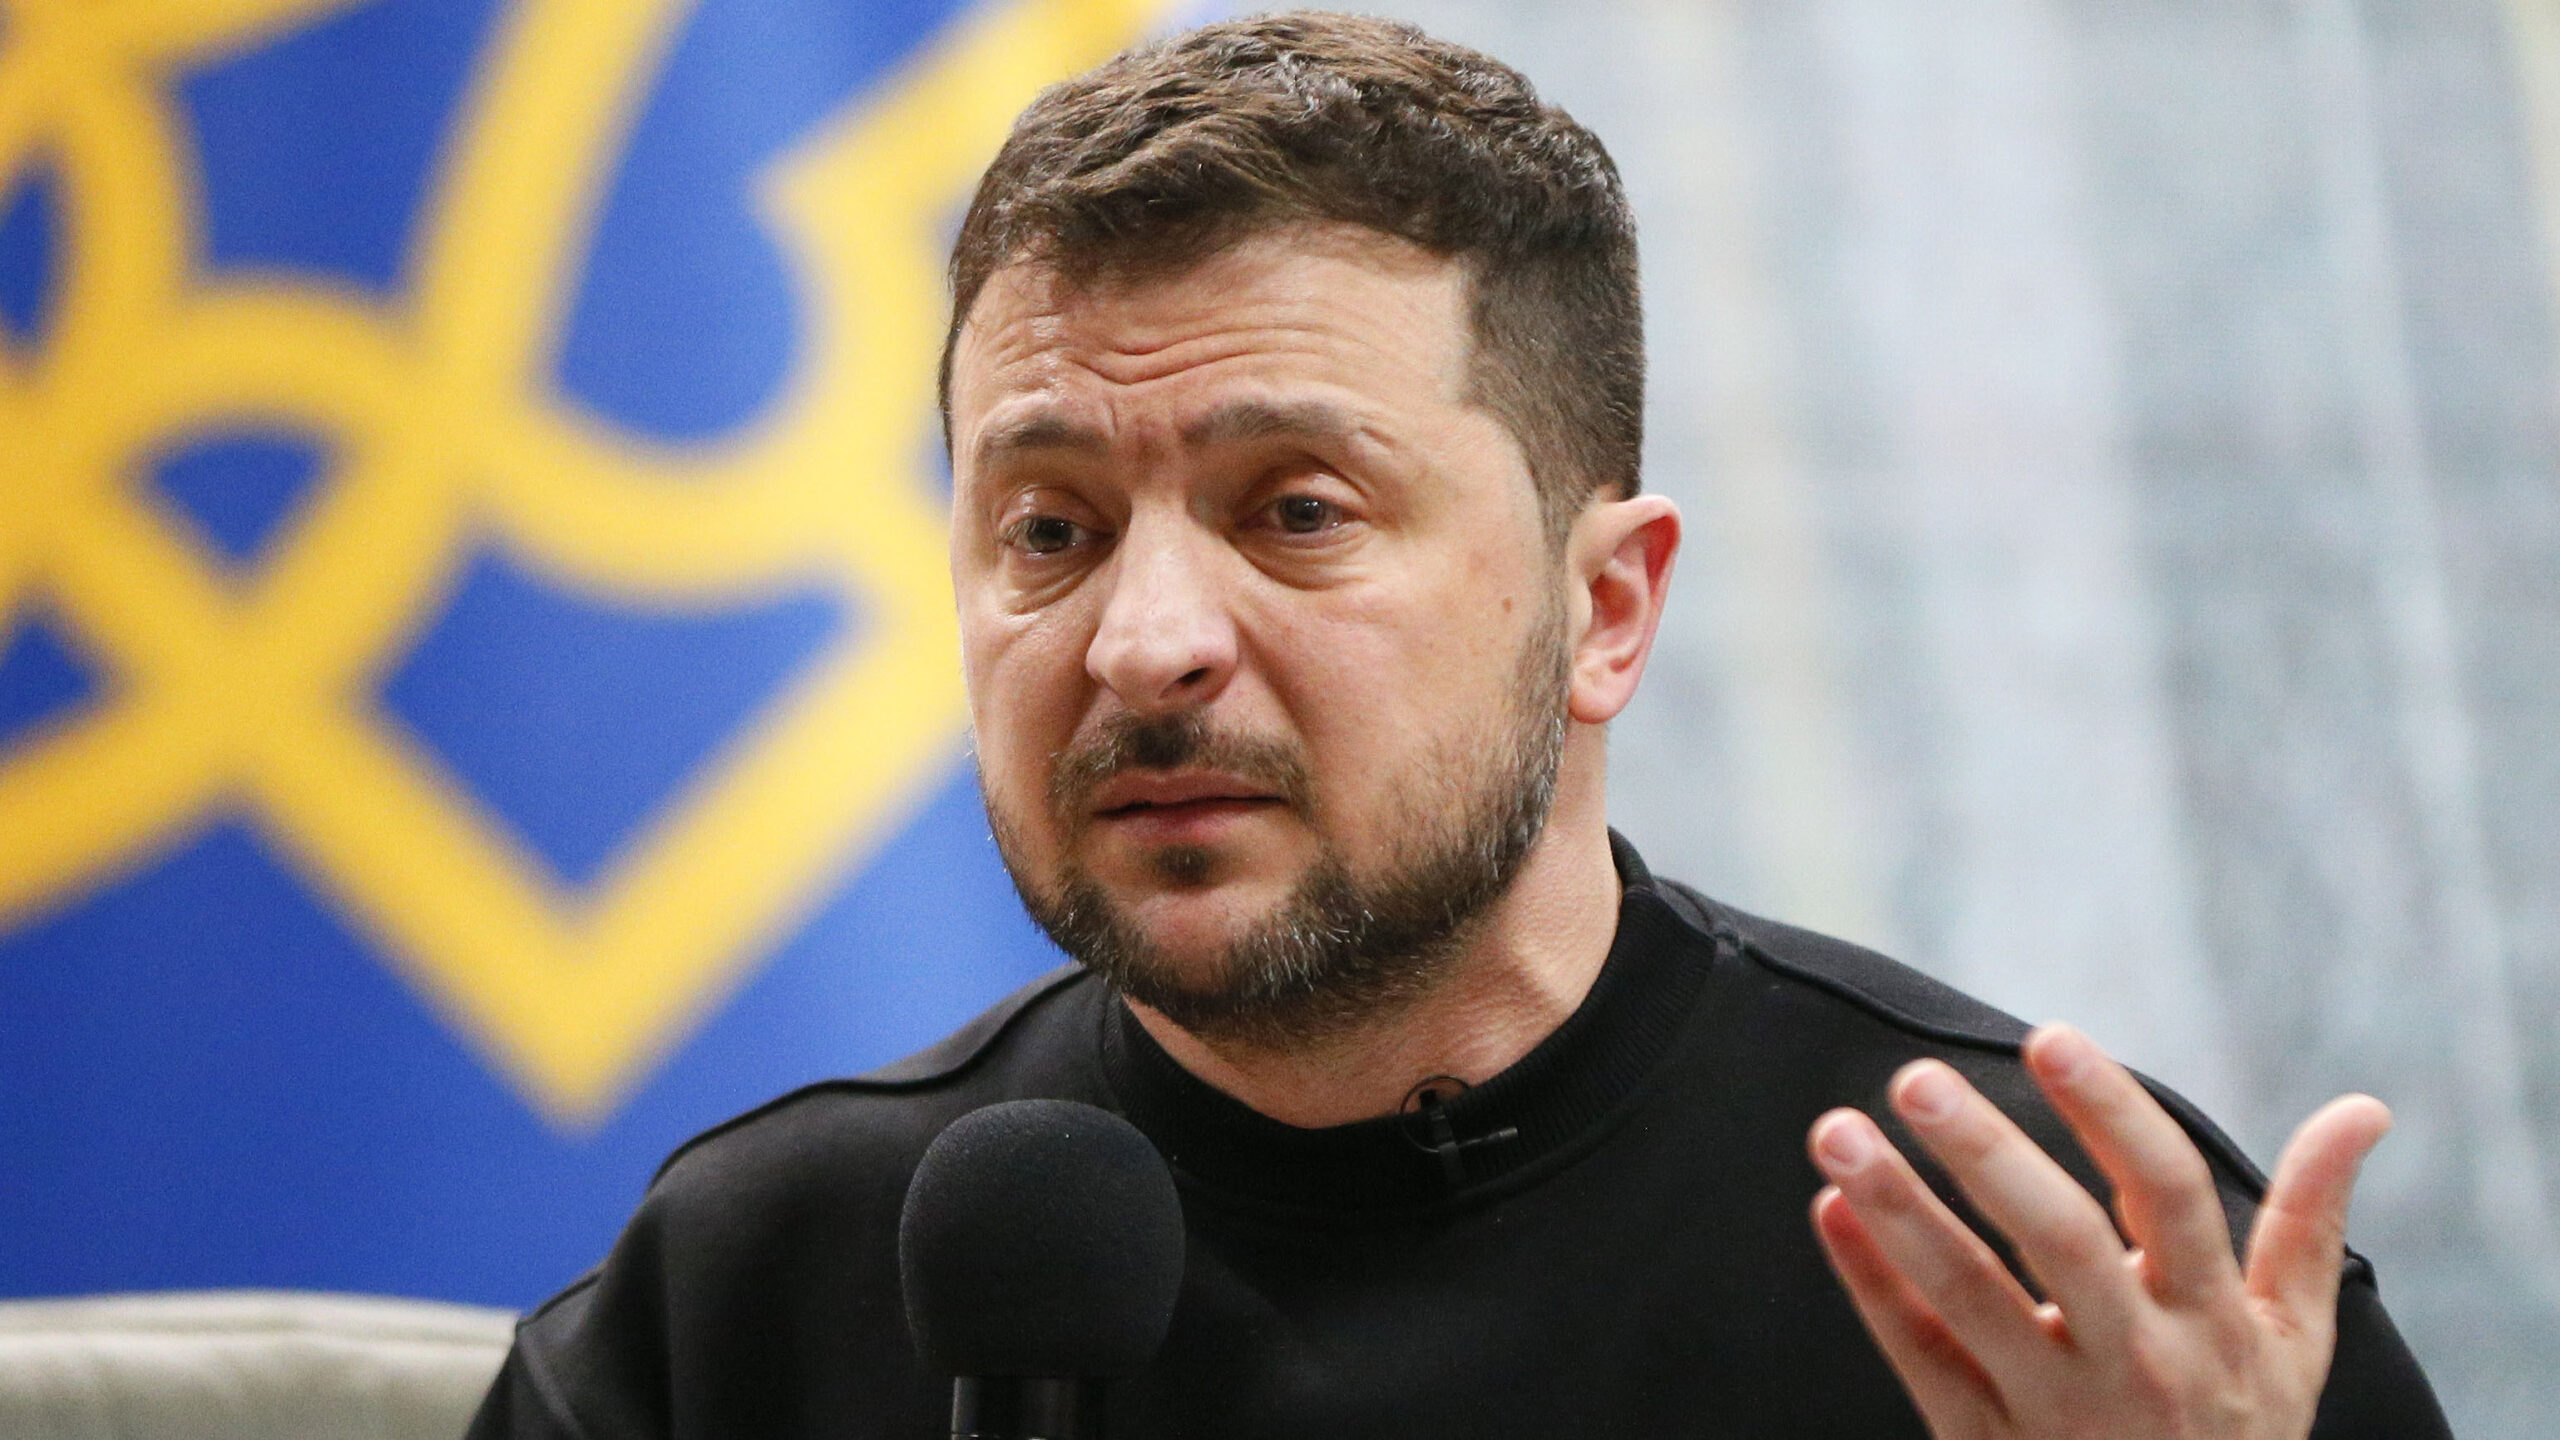 Oscars Deny Zelensky’s Request To Appear On Broadcast For Second Year In A Row: Report